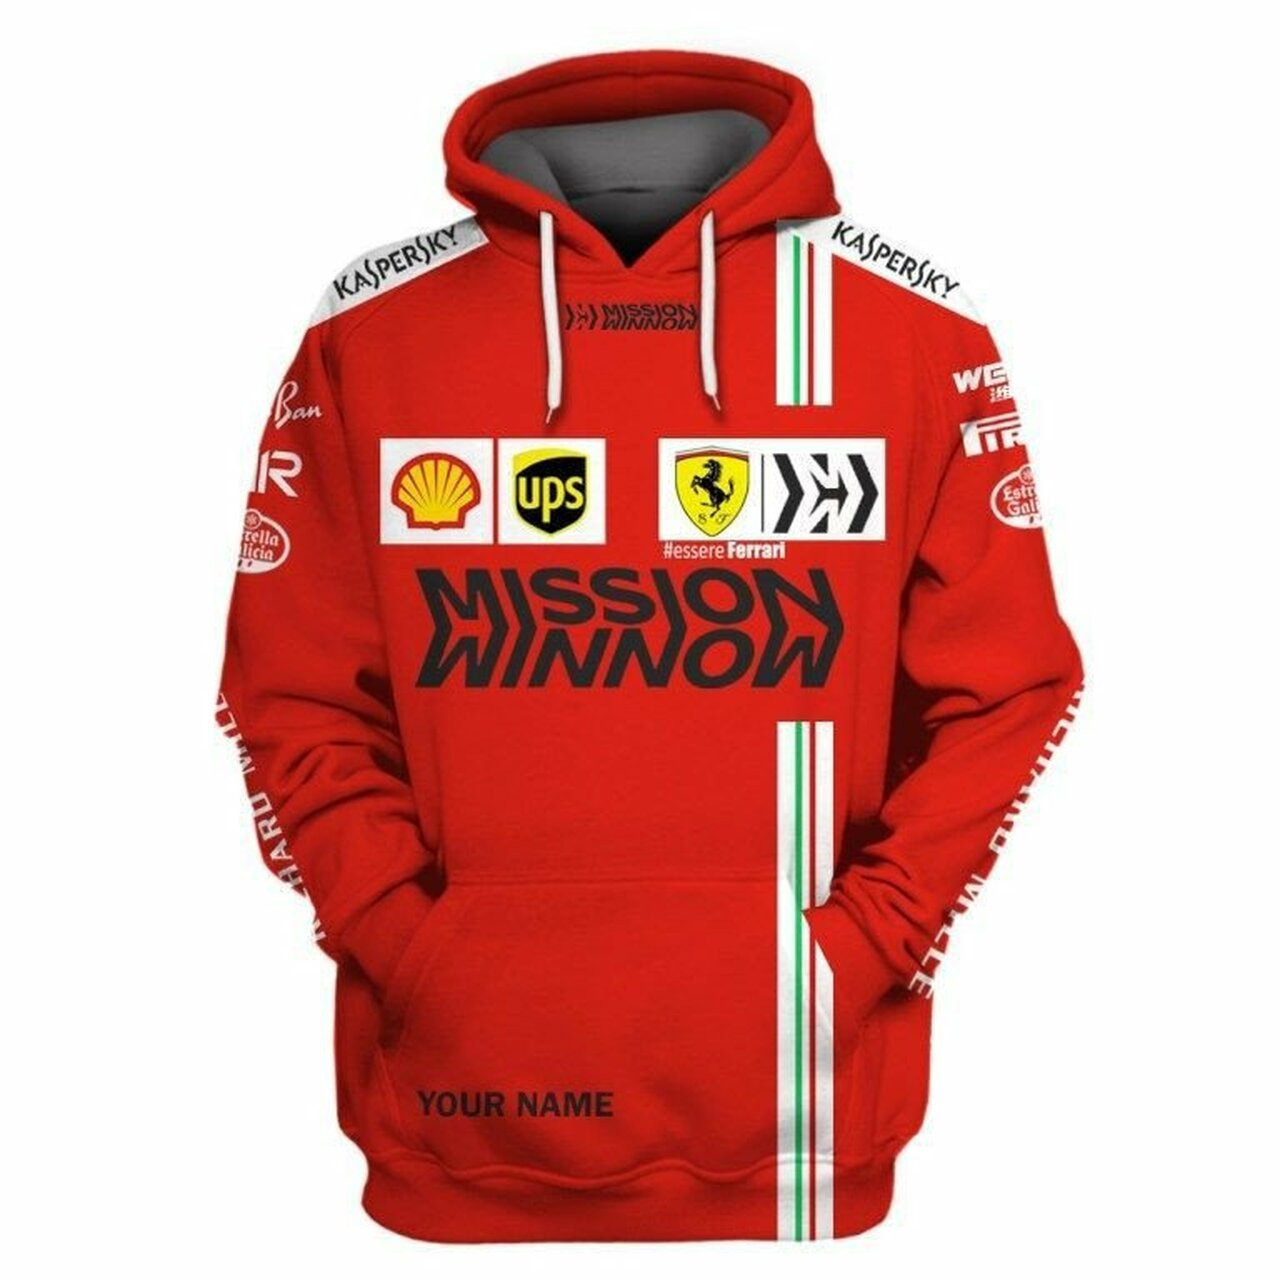 Personalized Racing Gift For Racer F1 Racing Team Essere Ferrari Hoodie 01